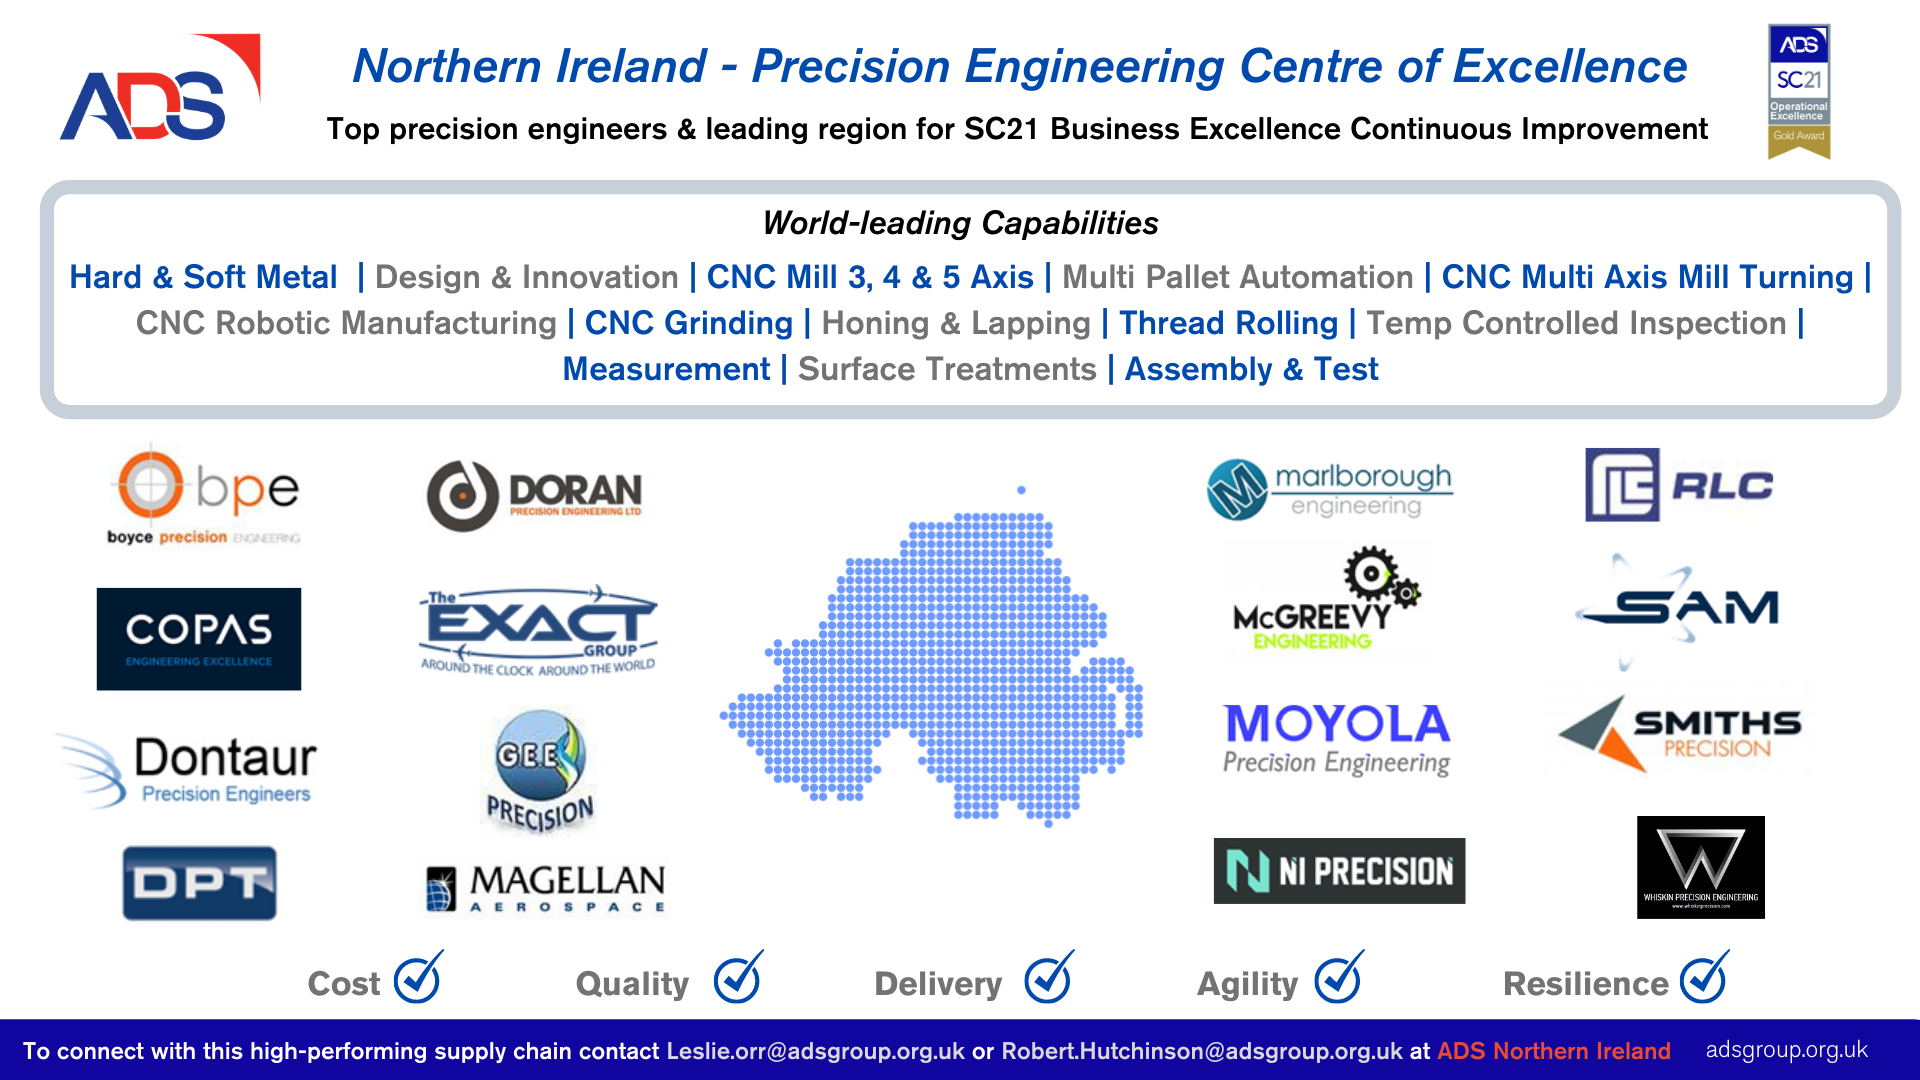 ADS Northern Ireland - Precision Engineering Centre of Excellence